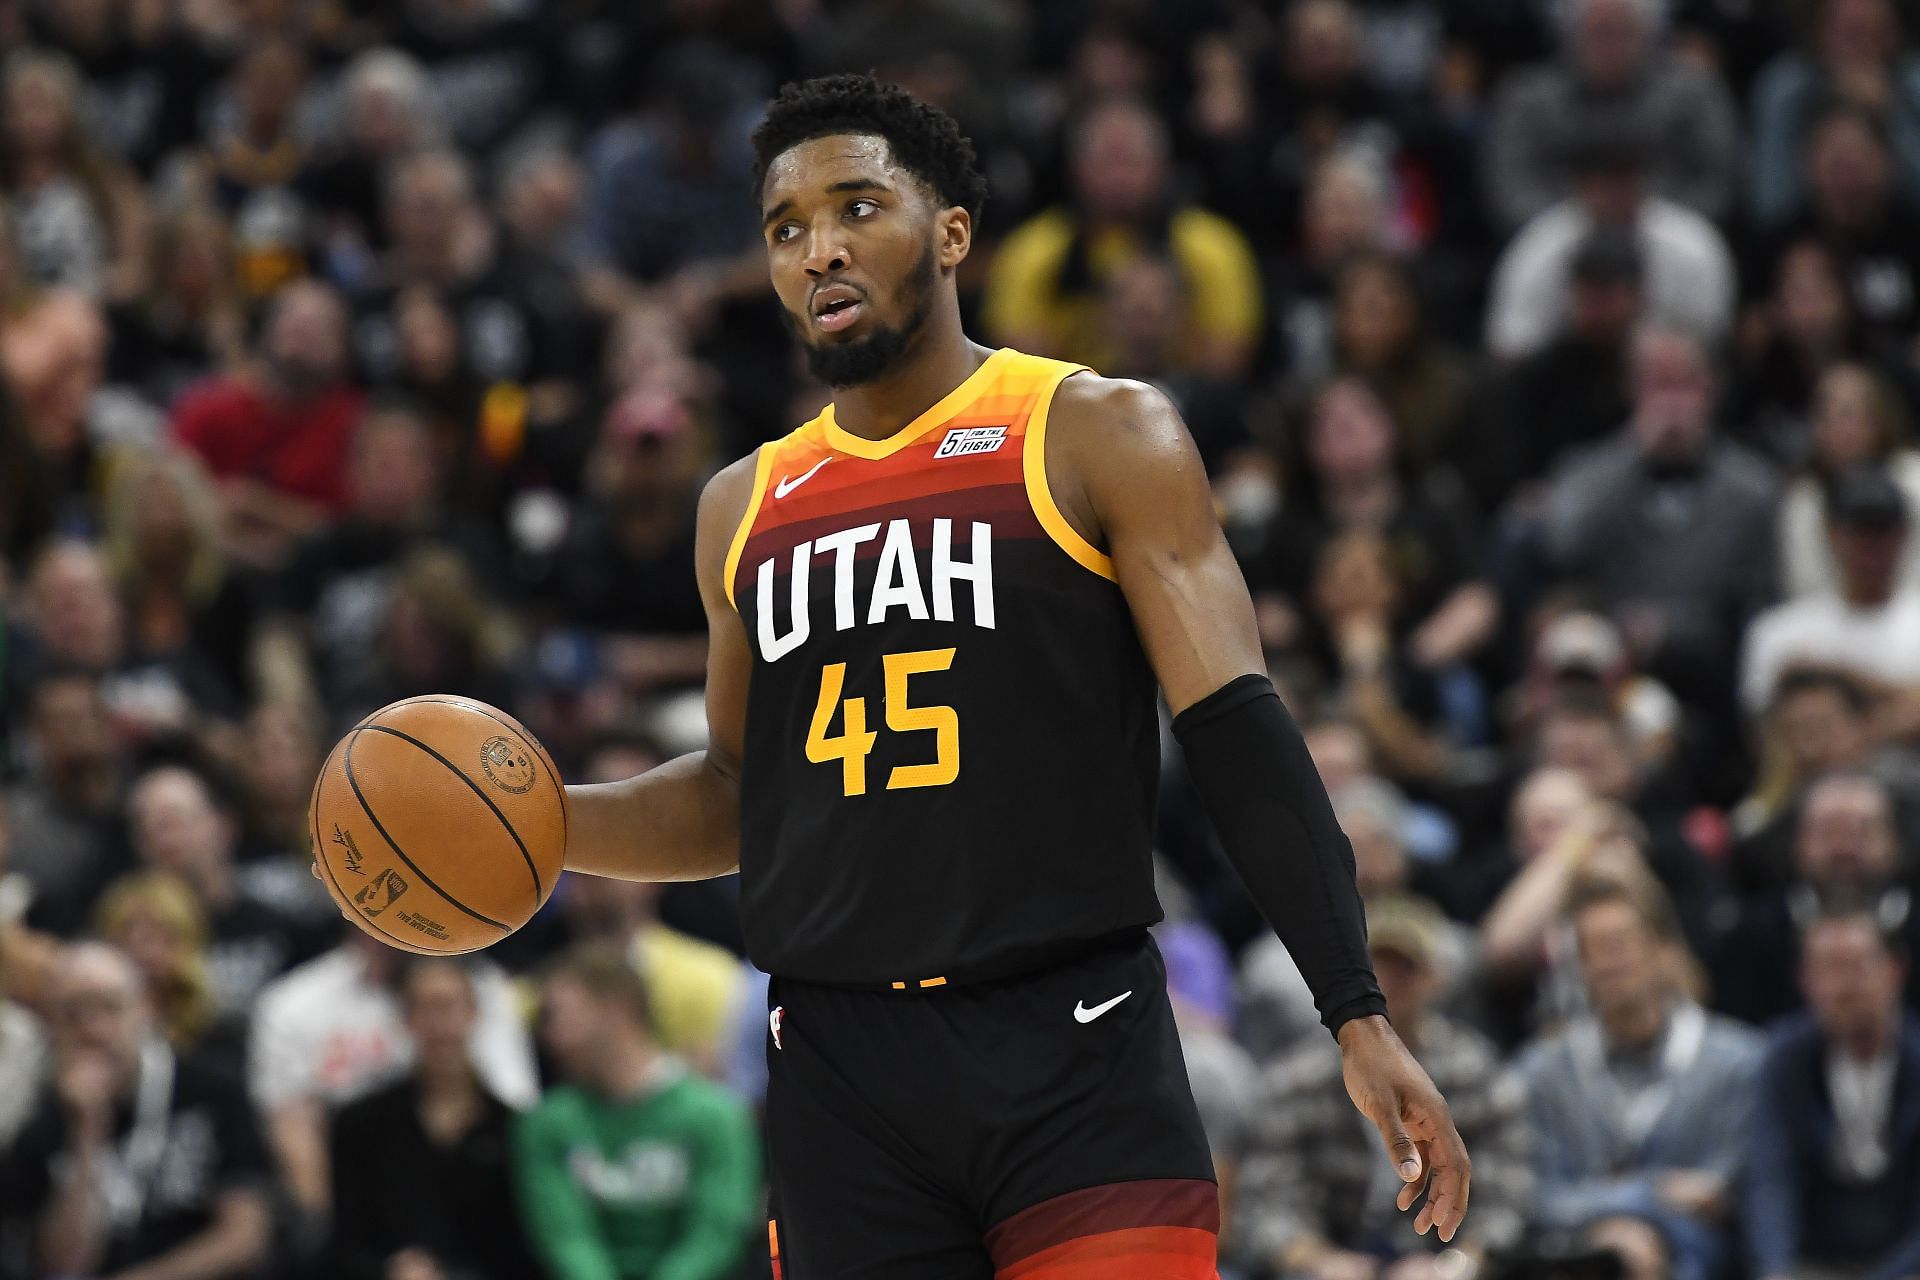 Donovan Mitchell is the headline act in this NBA rumors roundup